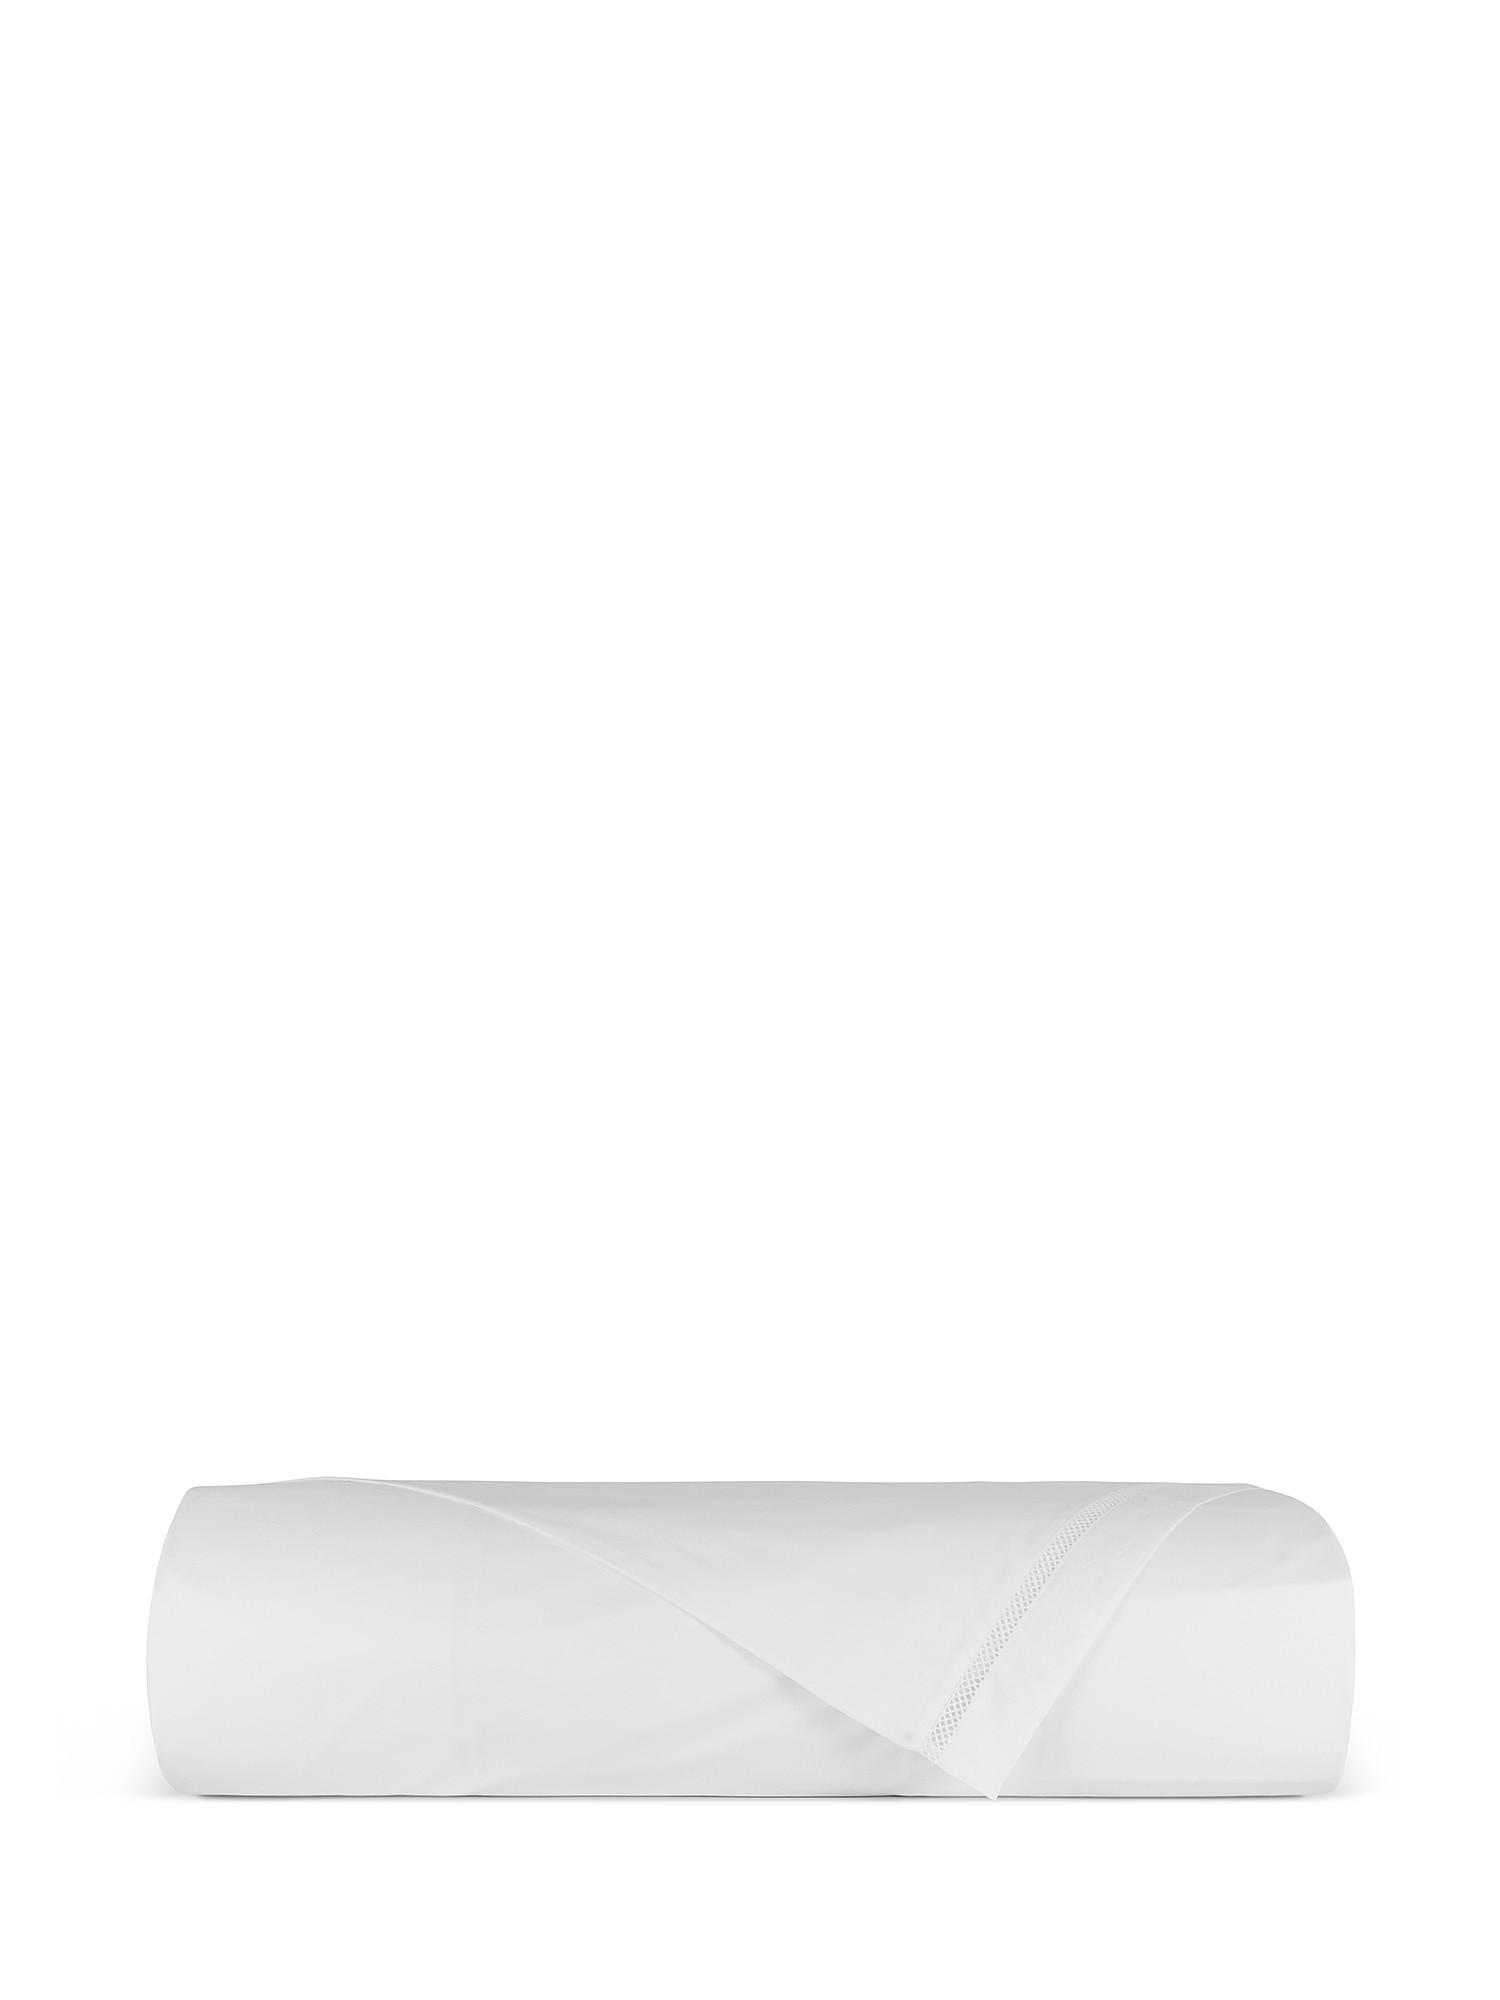 Portofino duvet cover in 100% cotton percale with drawn thread work, White, large image number 1